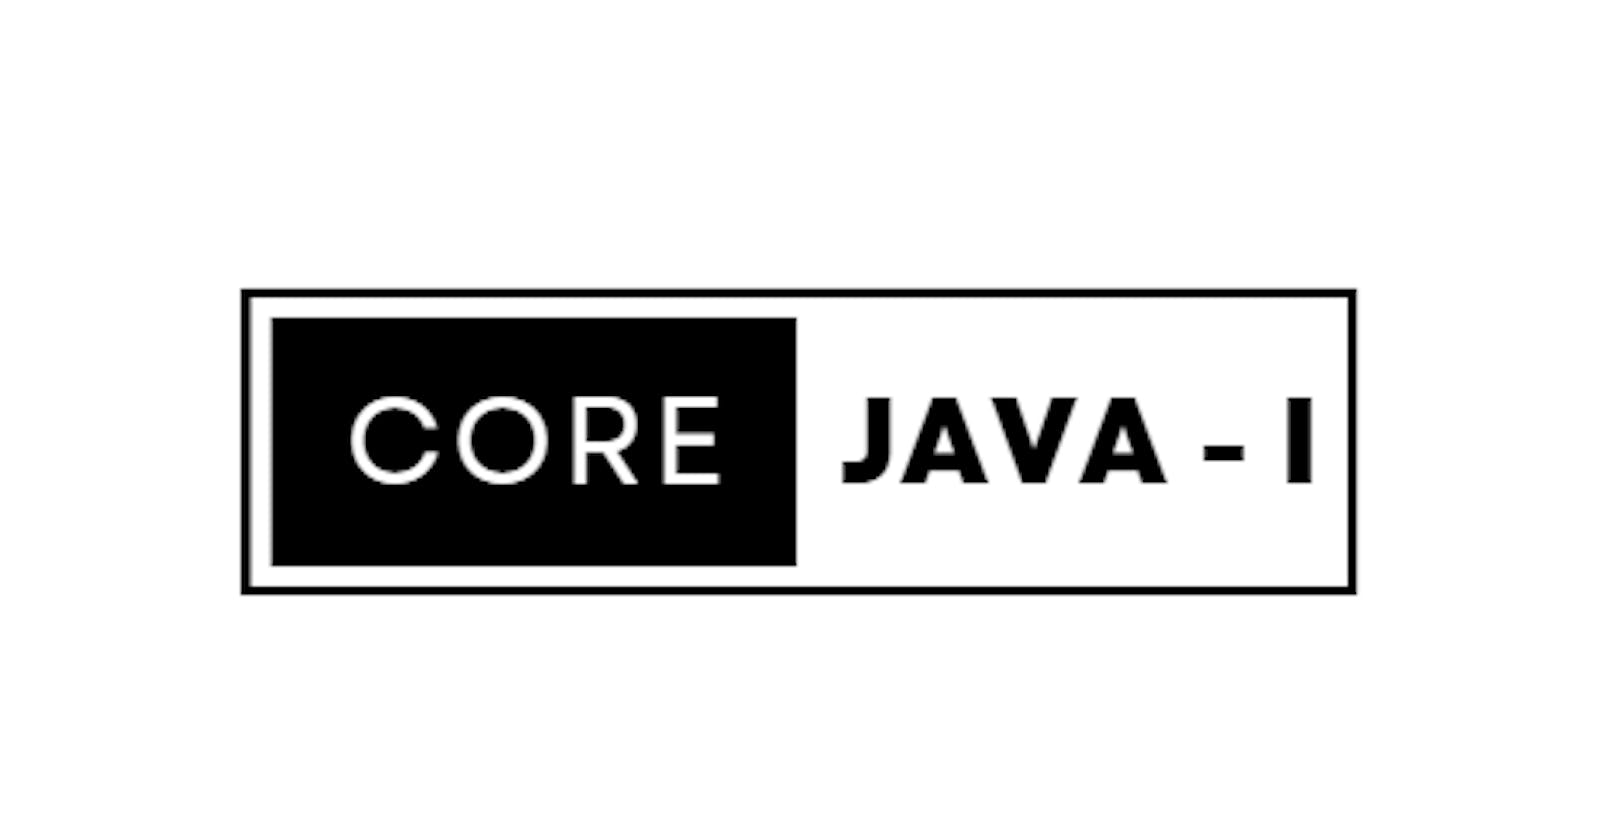 Java for Interviews (Core Java - I)